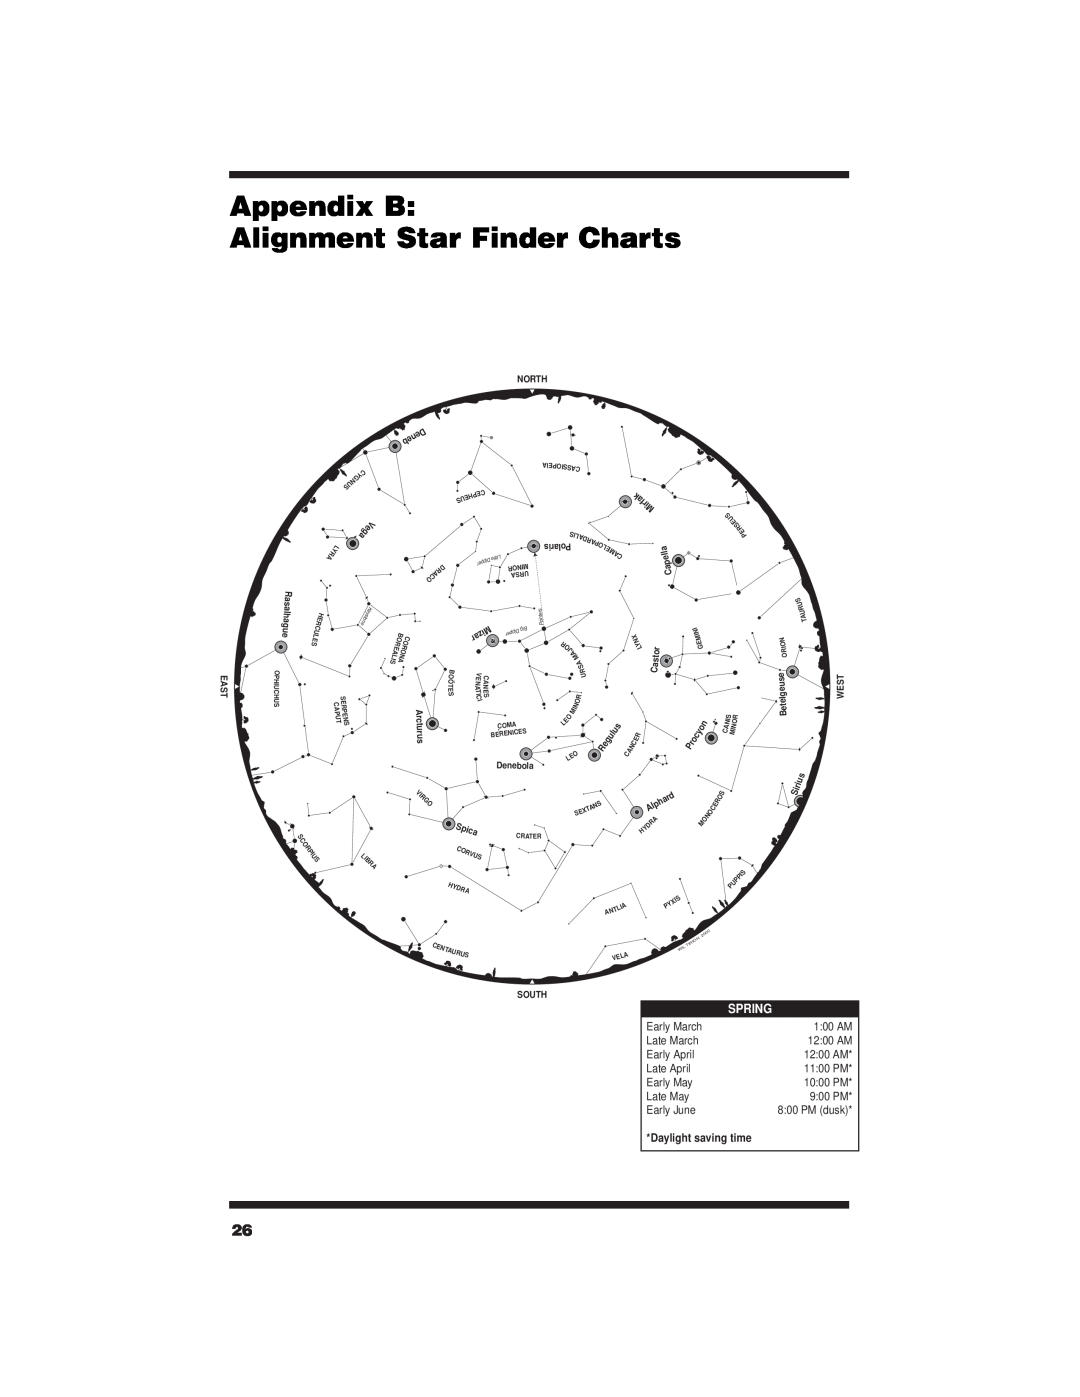 Orion 7880 instruction manual Appendix B Alignment Star Finder Charts, Spring, Daylight saving time 